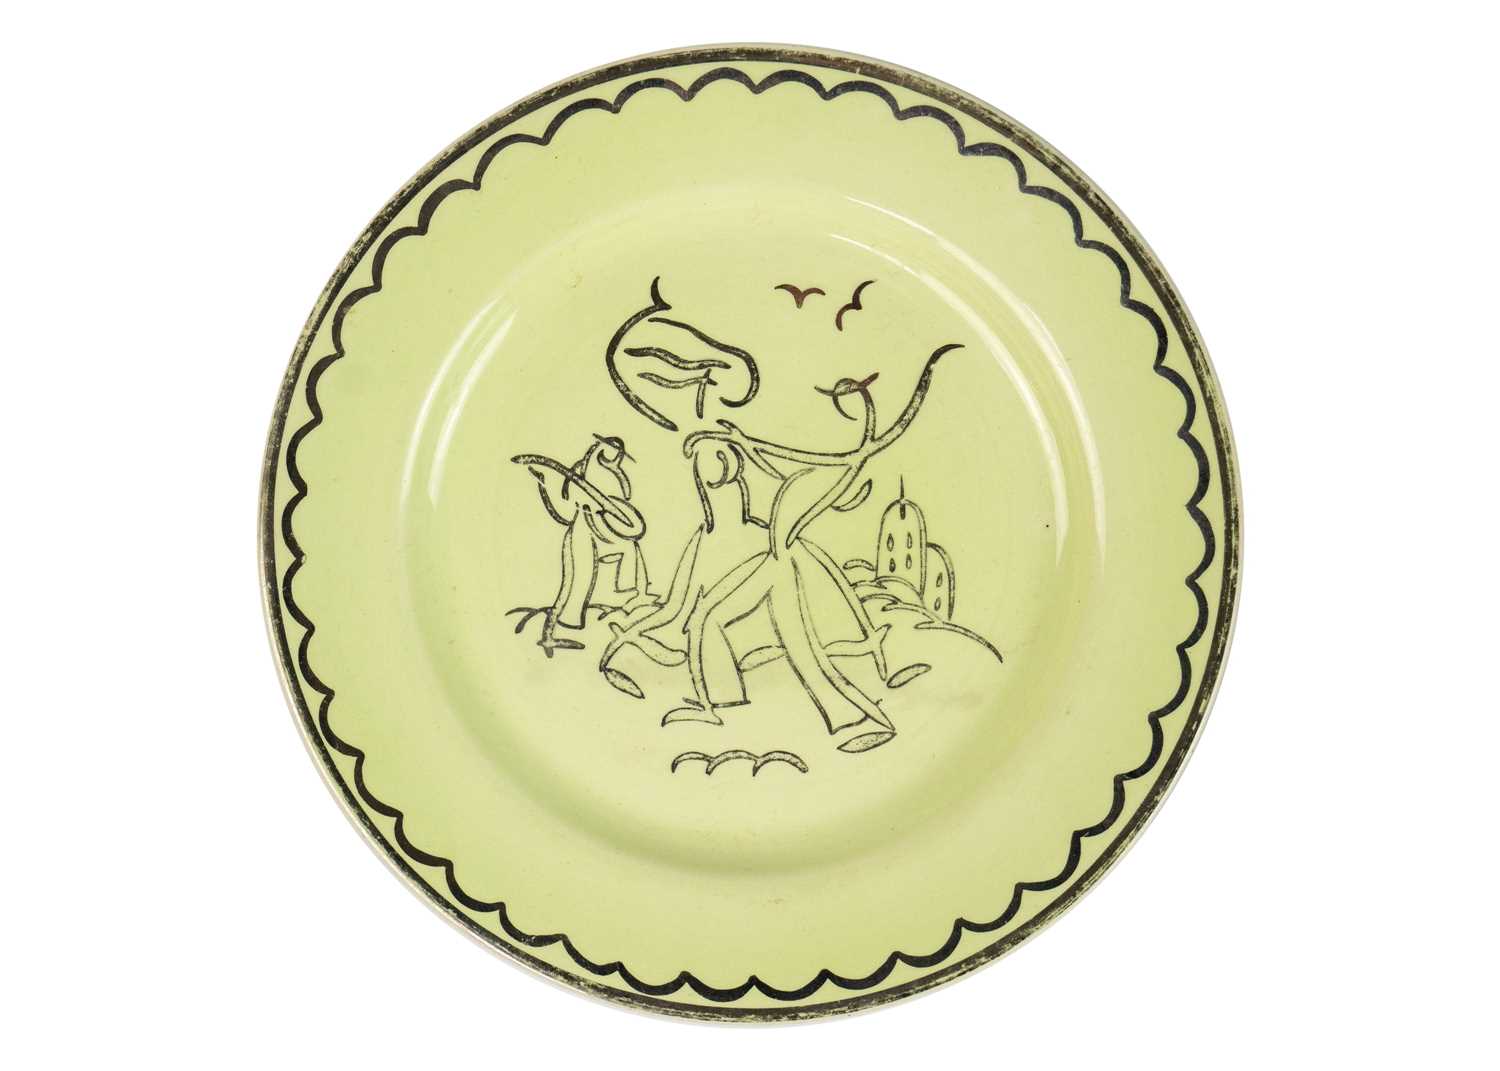 Lot 17 - A 1930s Clarice Cliff Bizarre circular plate designed by Ernest Procter A.R.A.